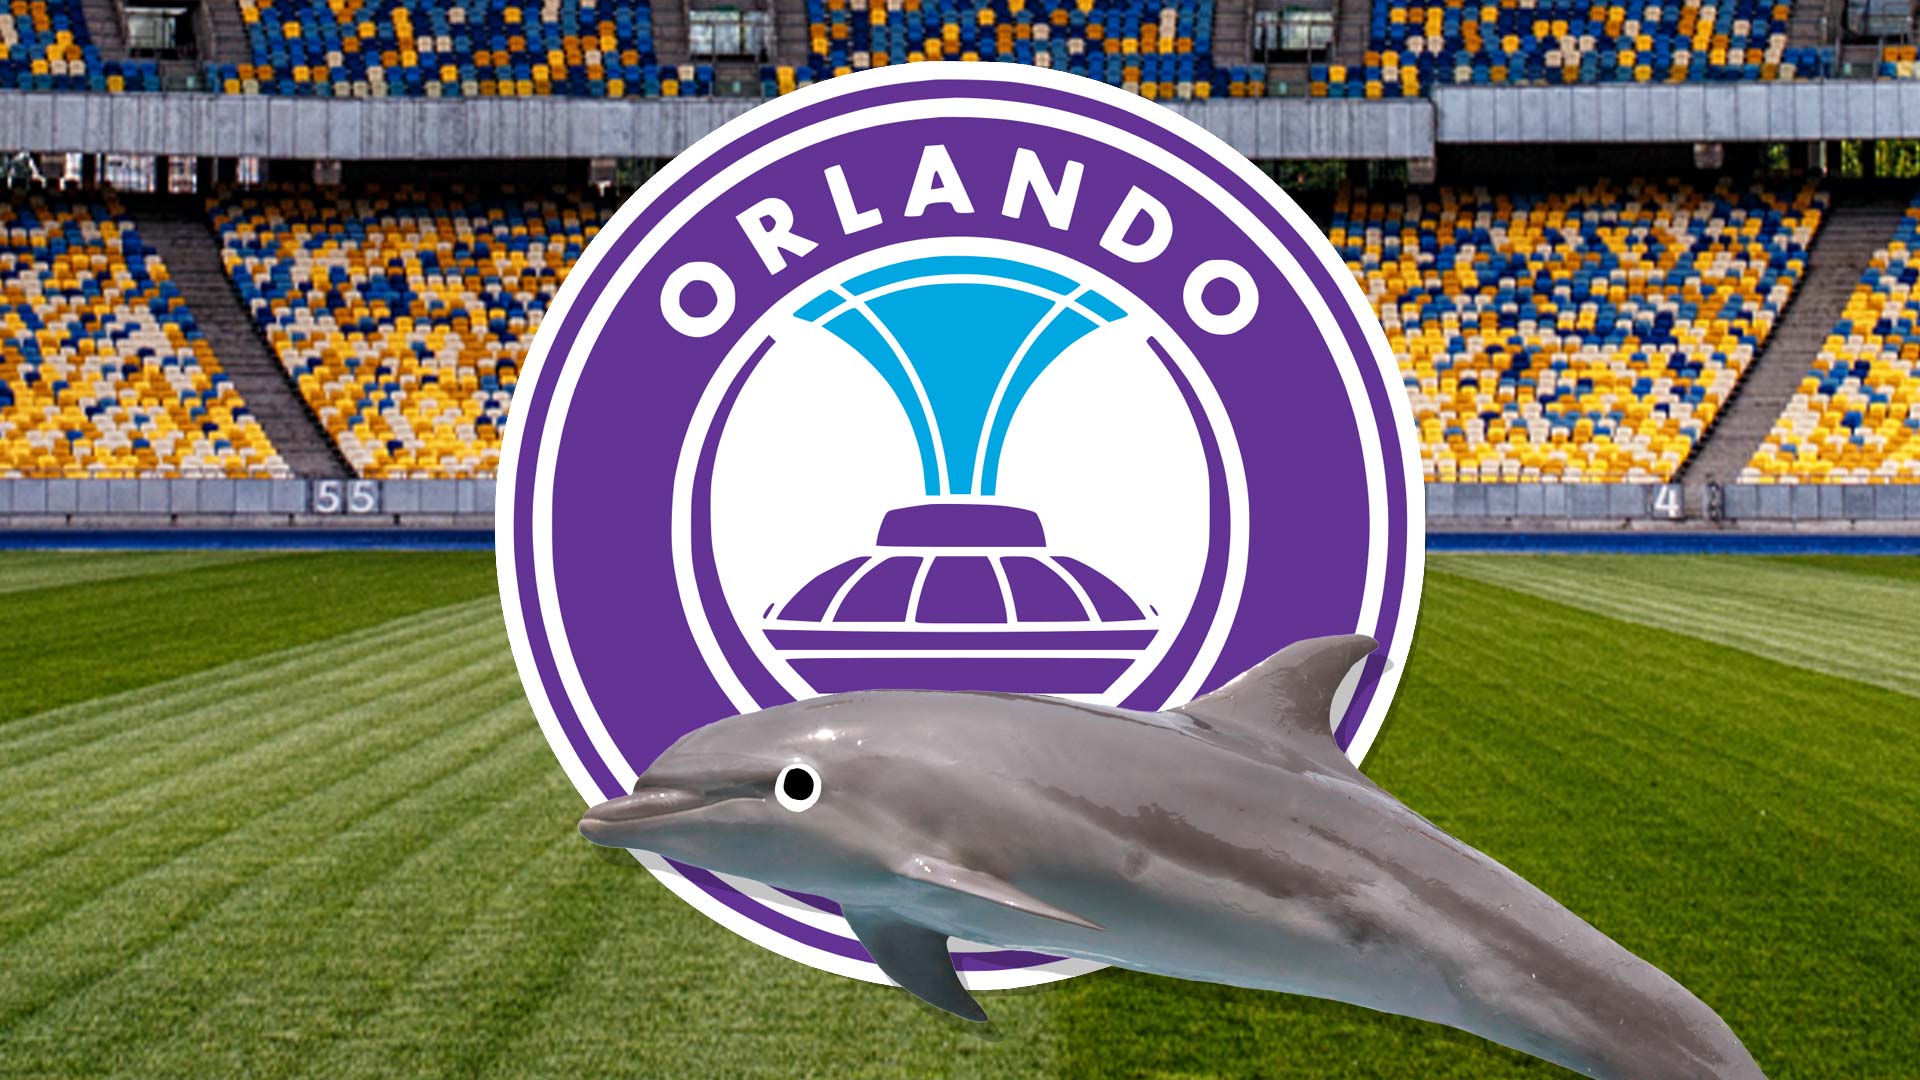 An Orlando football team badge obscured by a dolphin